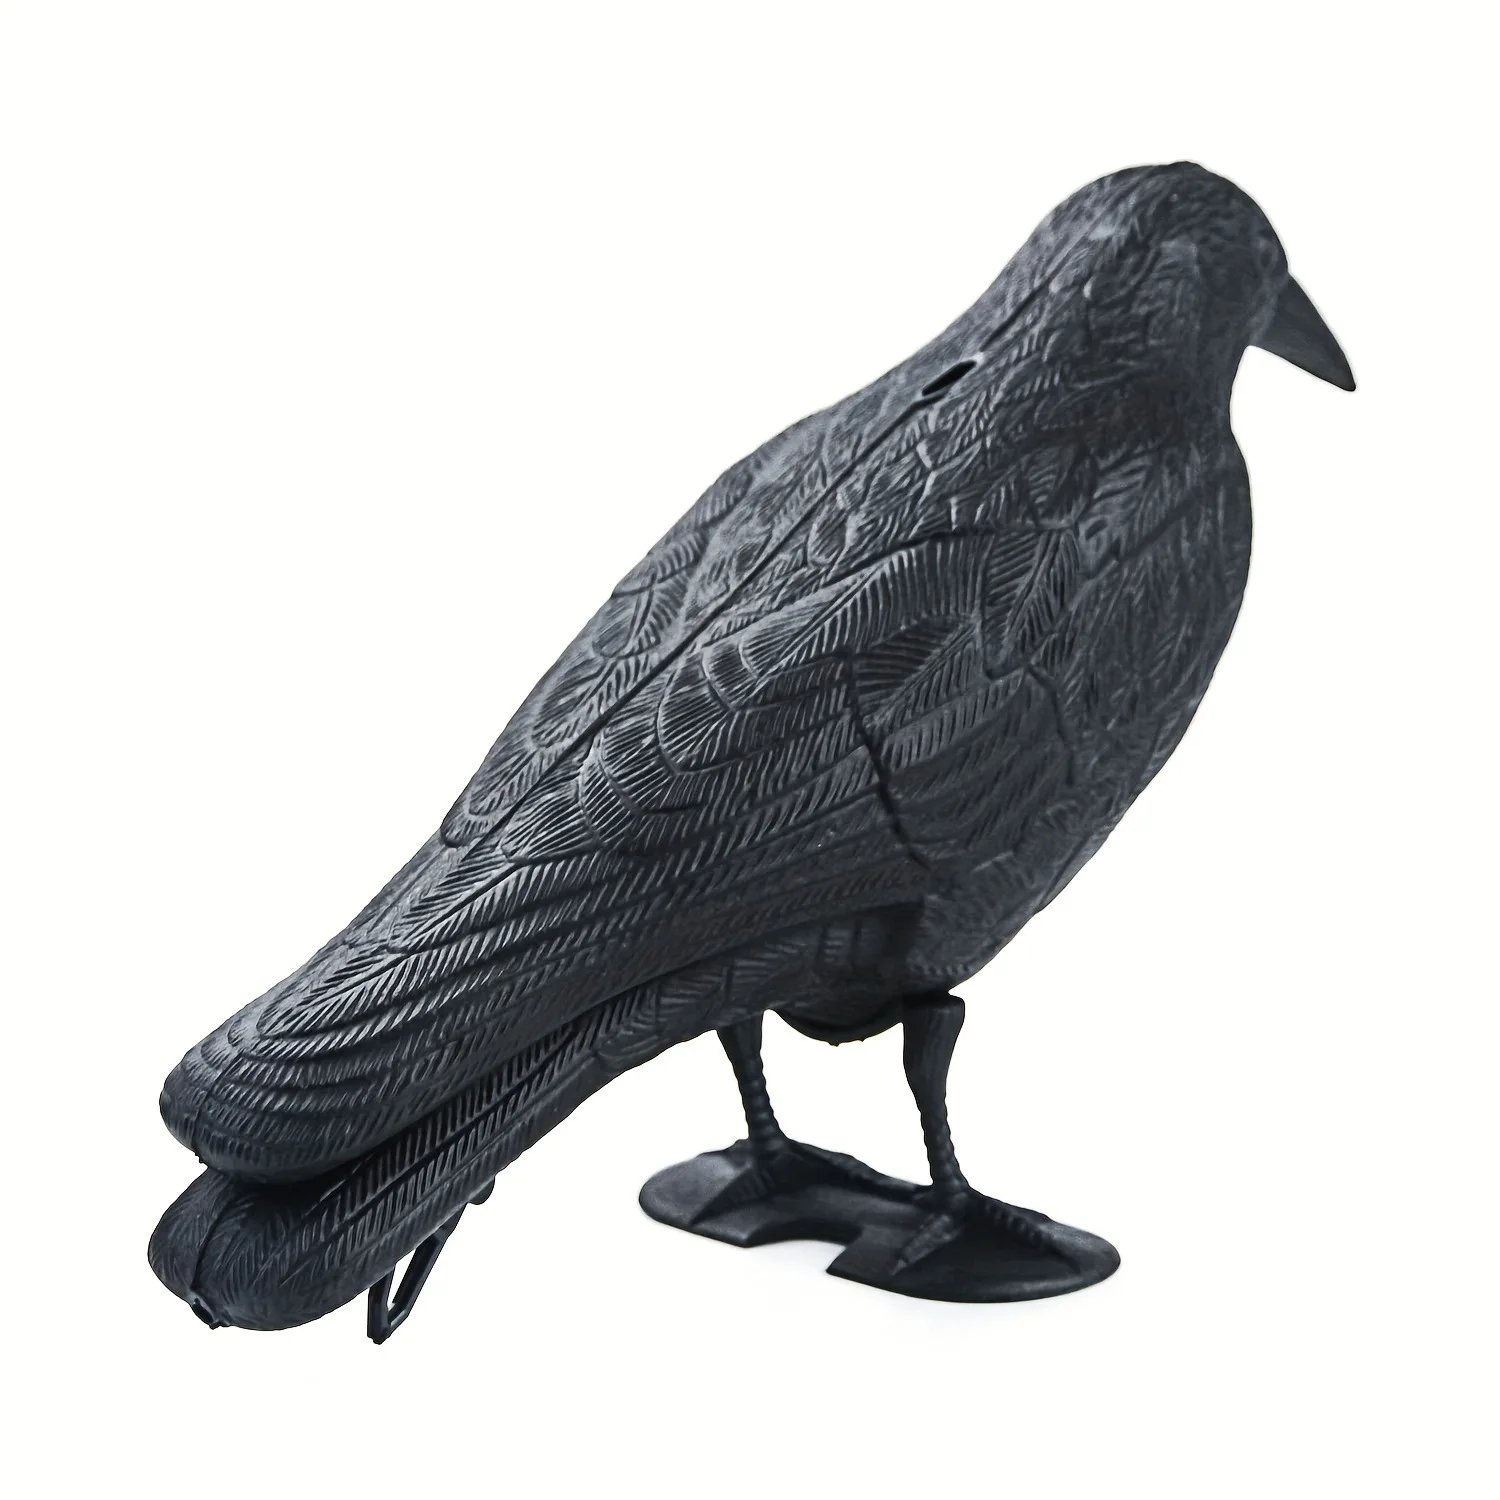 Halloween Black Crow Party Ornament Simulation Bird Decoration For Hunting With Stakes Yard Garden Desktop Realistic Figurine